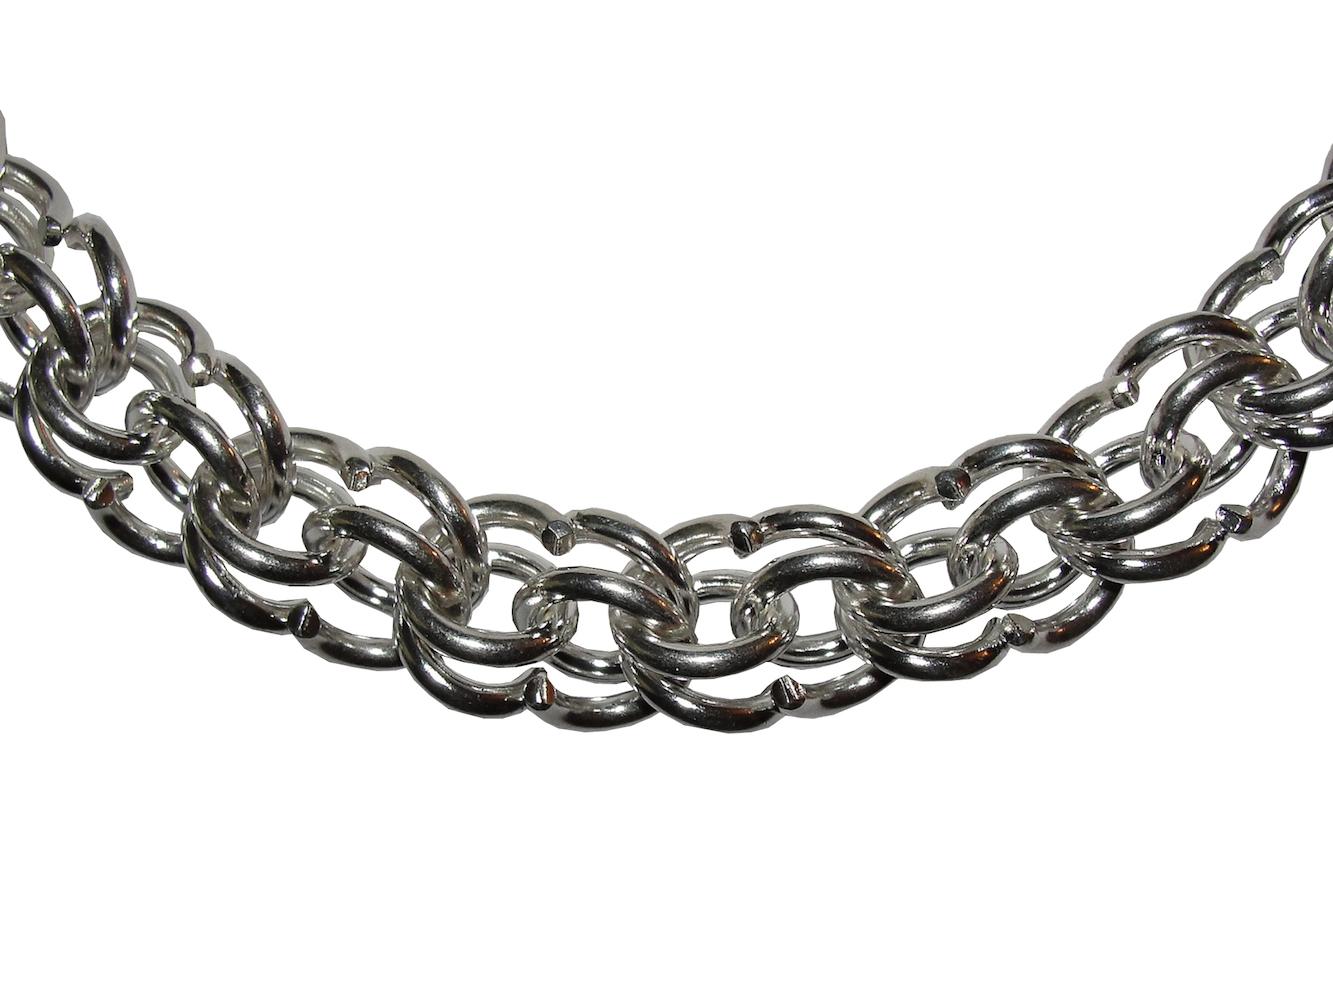 One of a kind Alberto Juan hand made sterling silver men's chain necklace.
Each link has been cut and soldered by hand not cast, which is a 2 day process for completion.
Chain is 11 mm's wide and 22